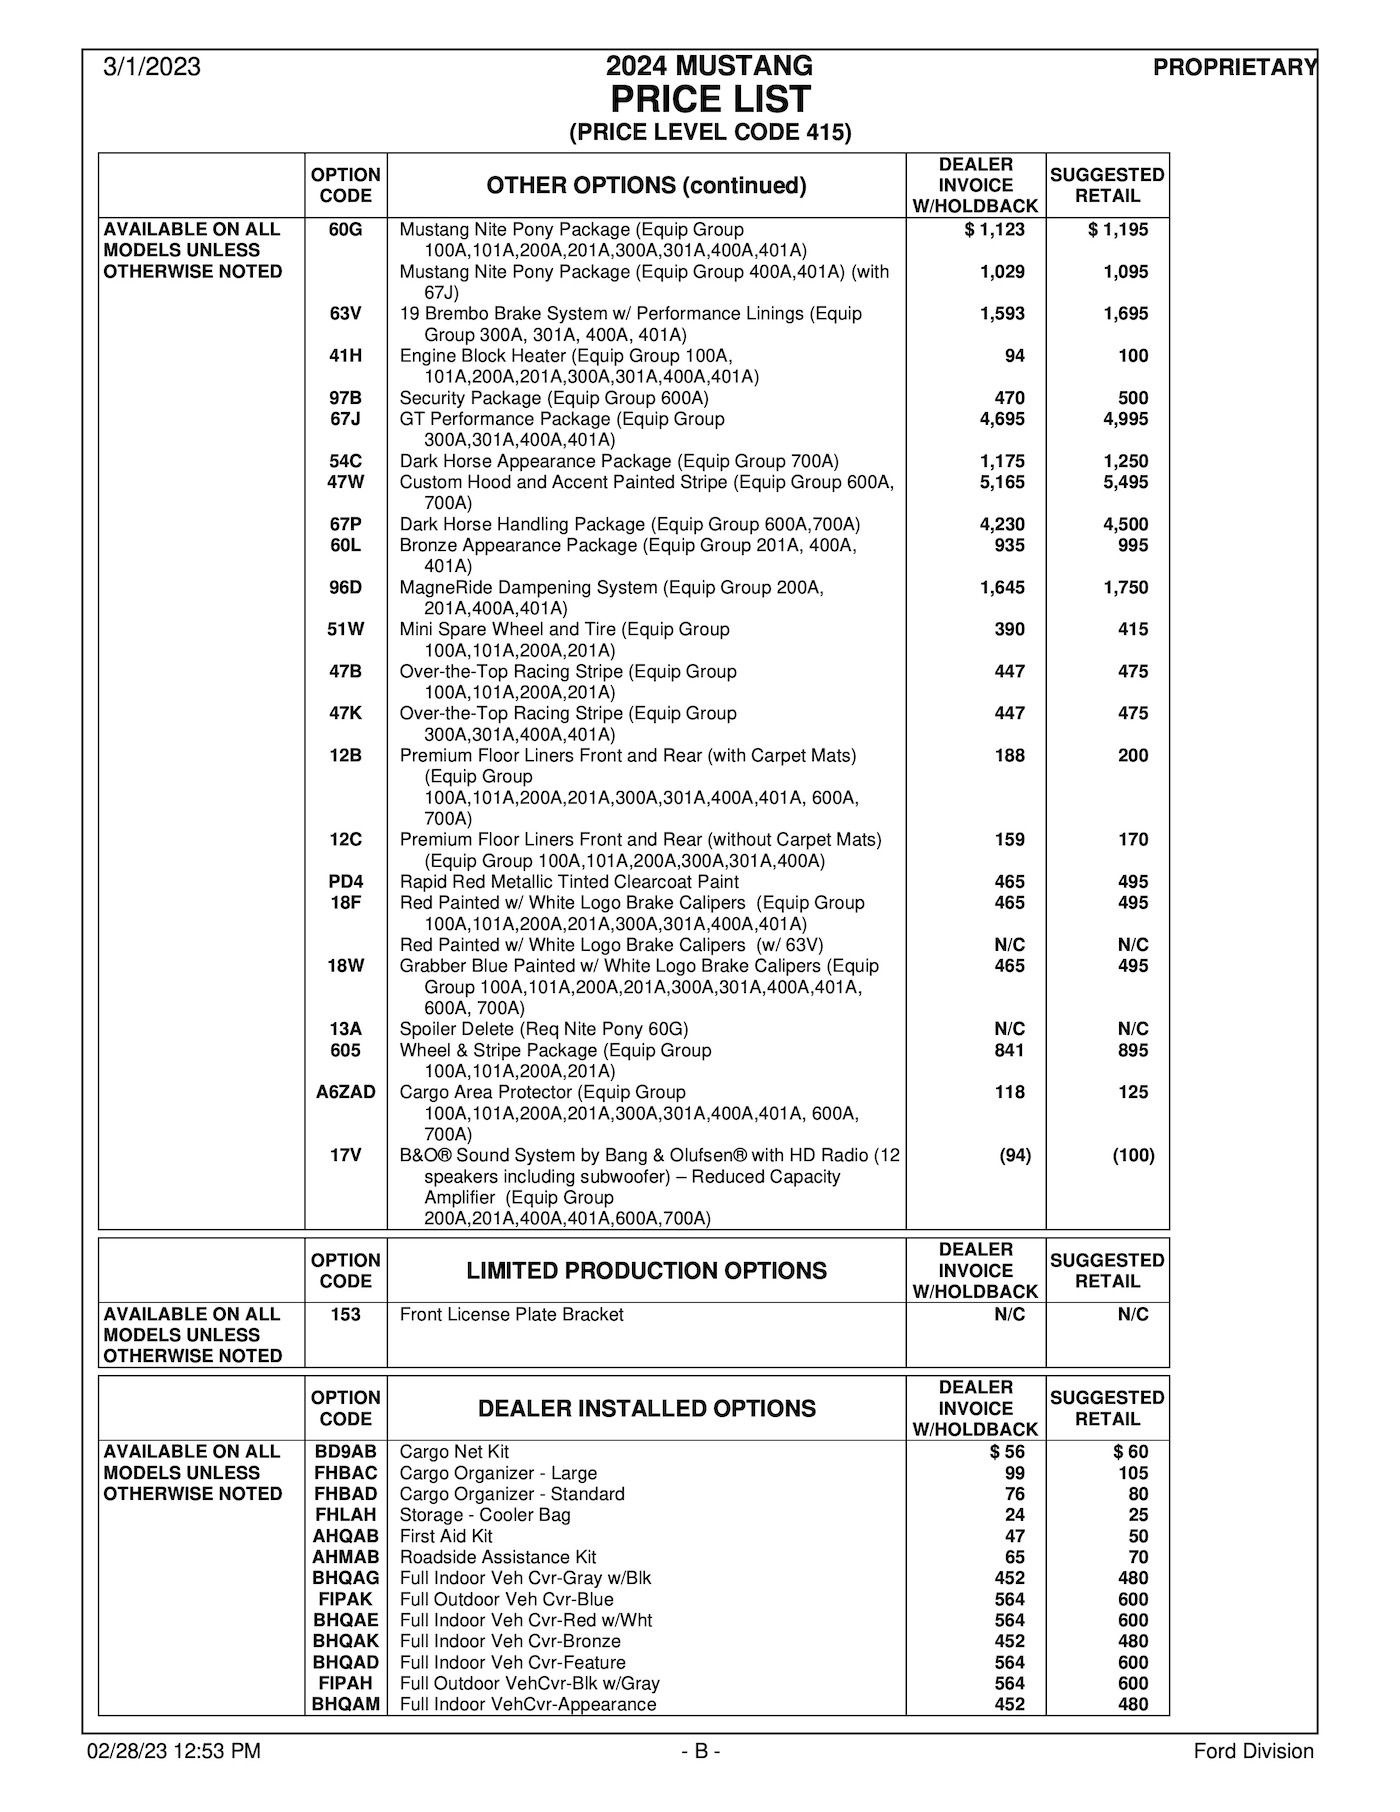 S650 Mustang Latest 2024 Mustang Order Guide and Price List (w/ MSRP & Invoice)! 2024MY Mustang PL415 Price List-2